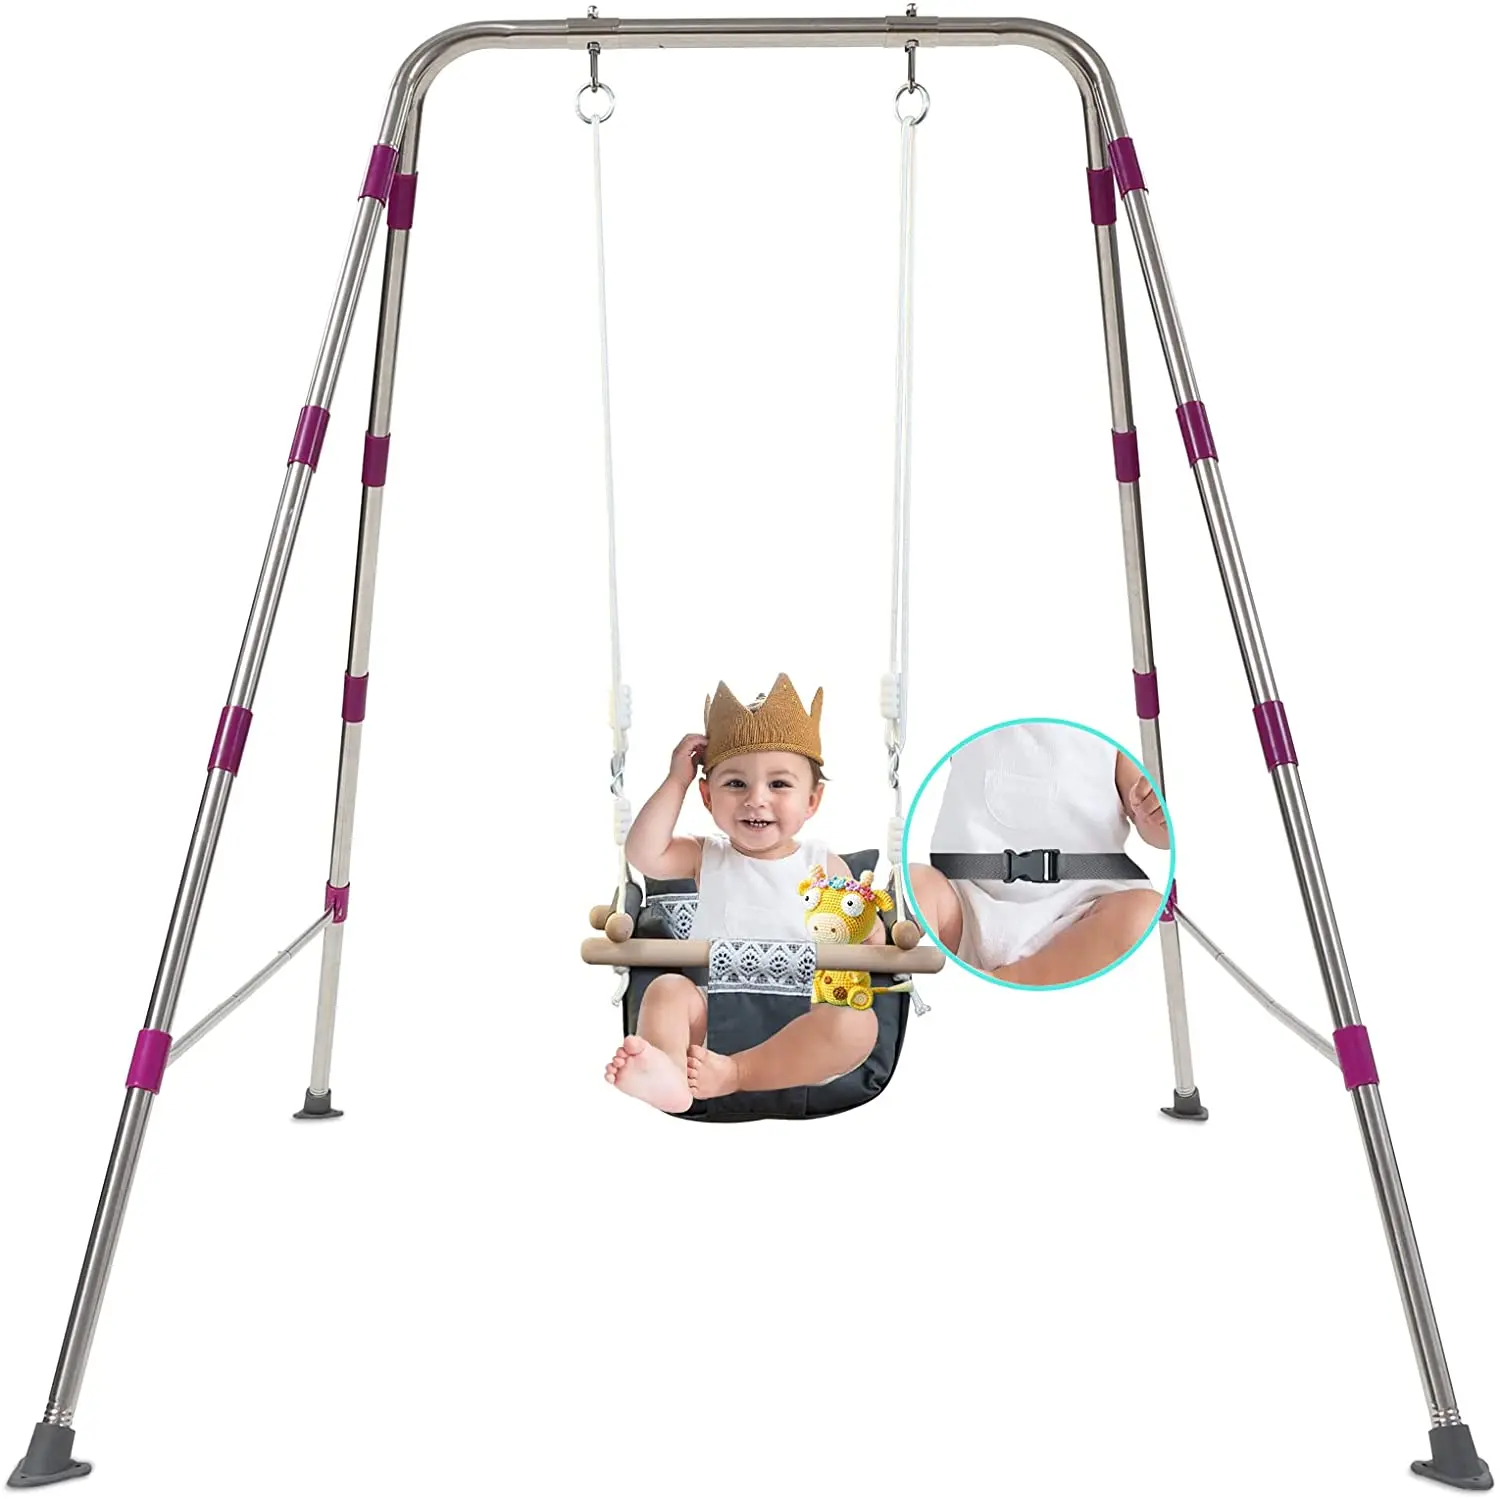 Baby Hammock Chair Birthday Gift. Wooden Hanging Swing Seat Chair for Baby with Safety Belt and mounting Hardware Grey Canvas Baby Swing by Cateam 